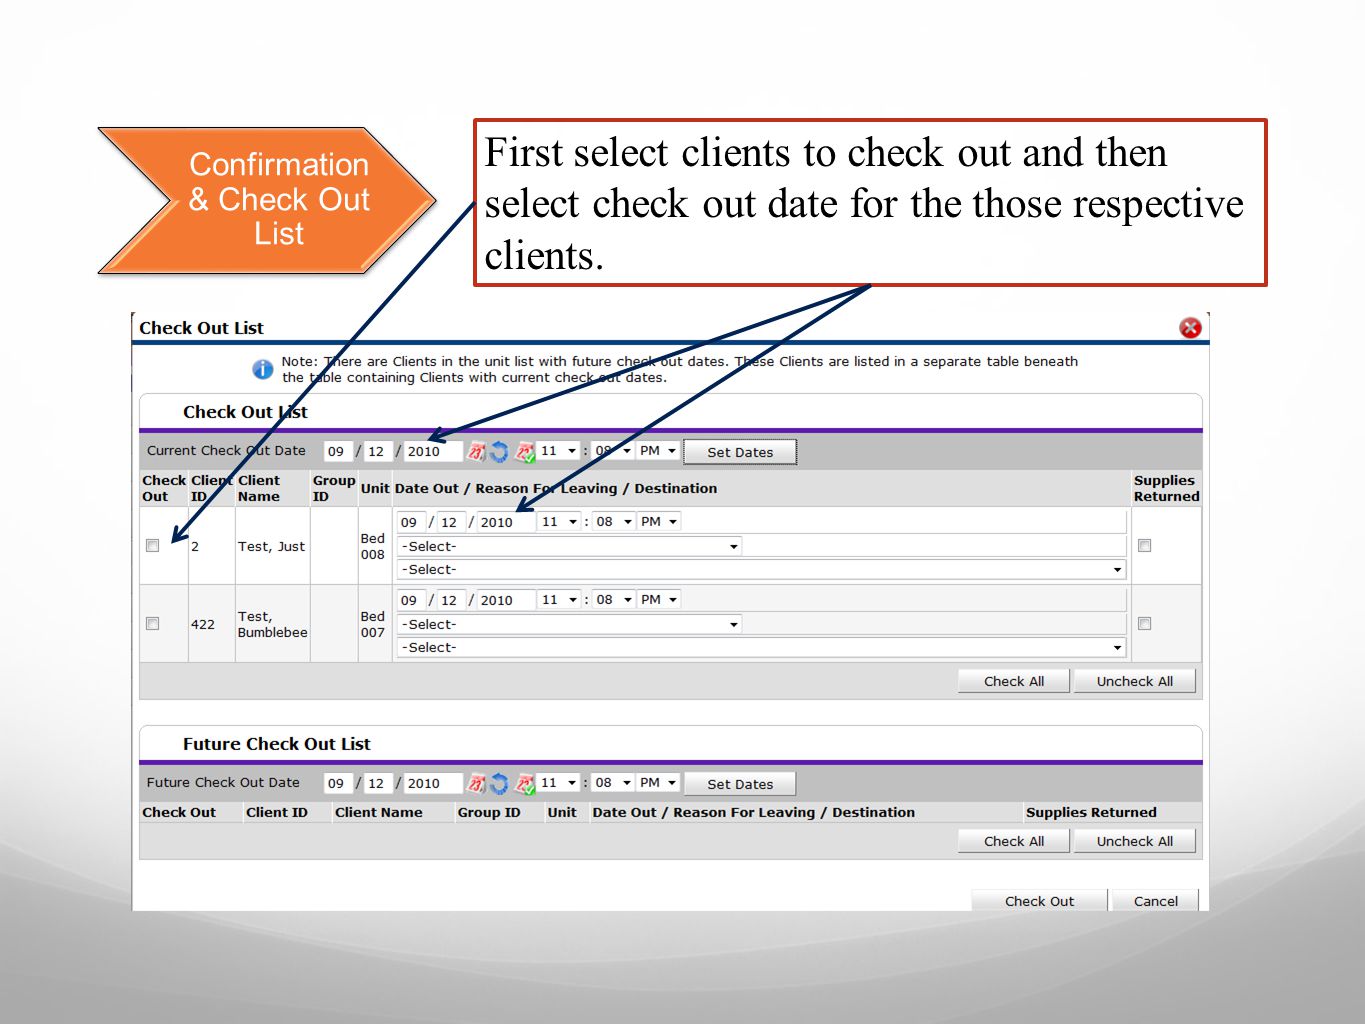 Confirmation & Check Out List First select clients to check out and then select check out date for the those respective clients.